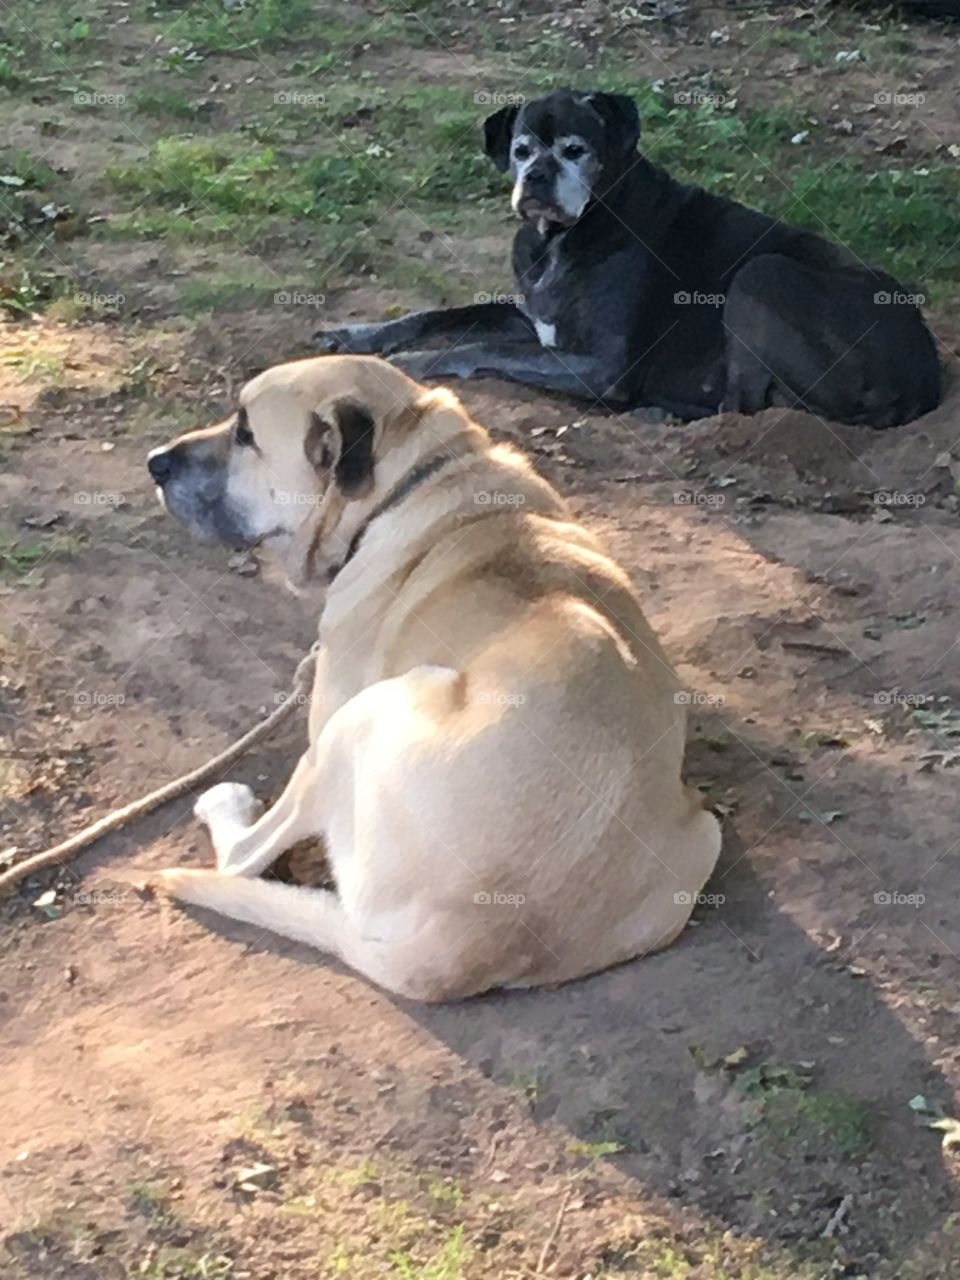 Brother and sister just chilling in the cool morning air. Just enjoying life together.